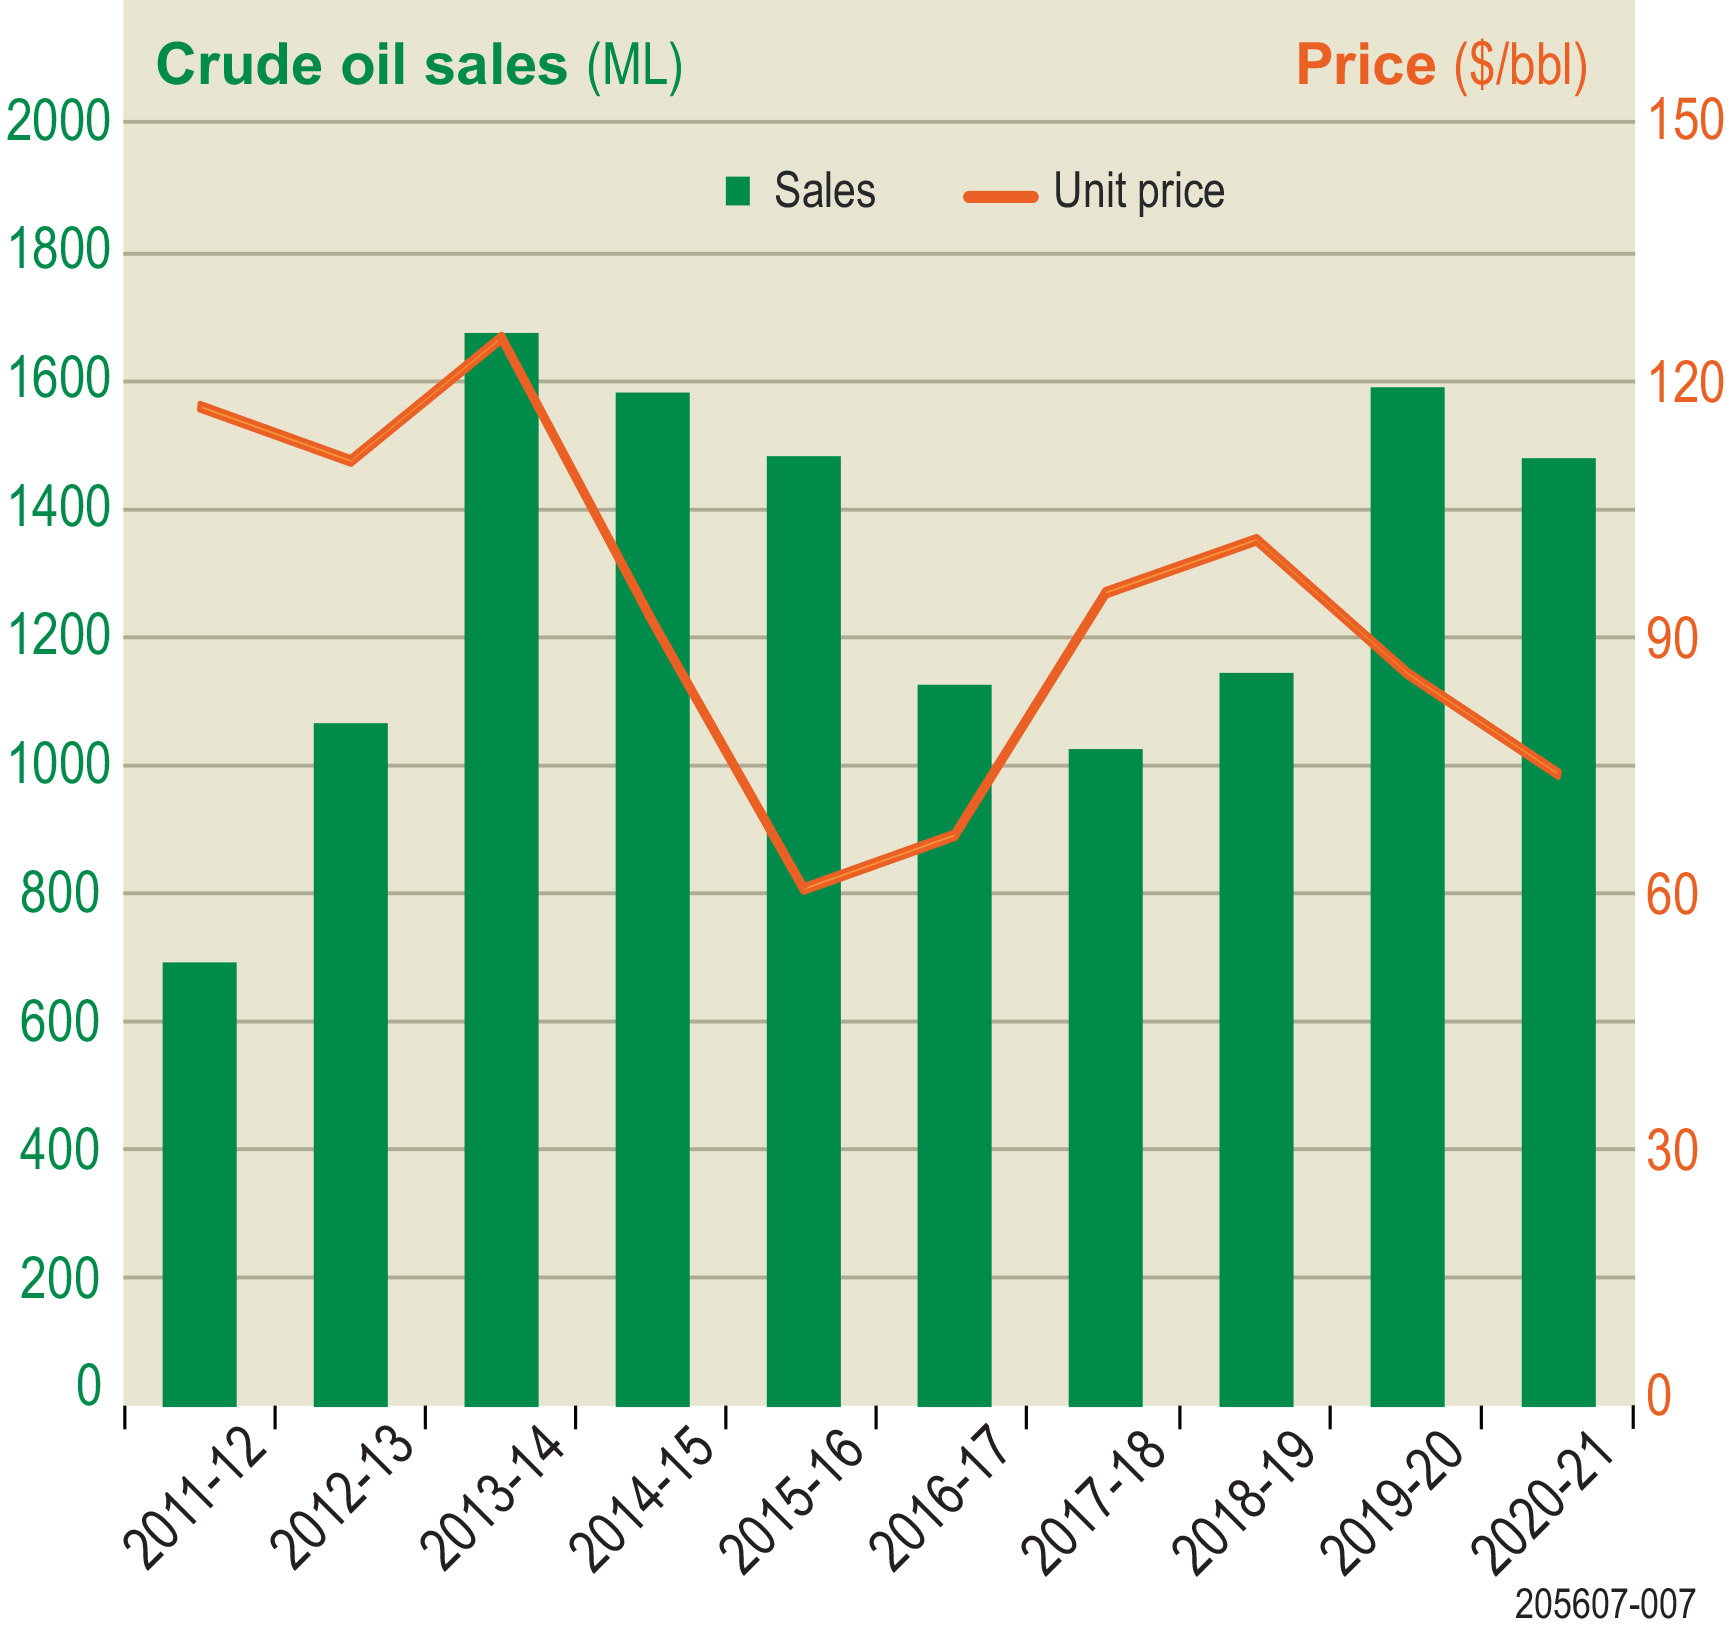 Graph showing crude oil sales (ML) compared to unit price ($/bbl) between 2011-12 and 2020-21 financial years.